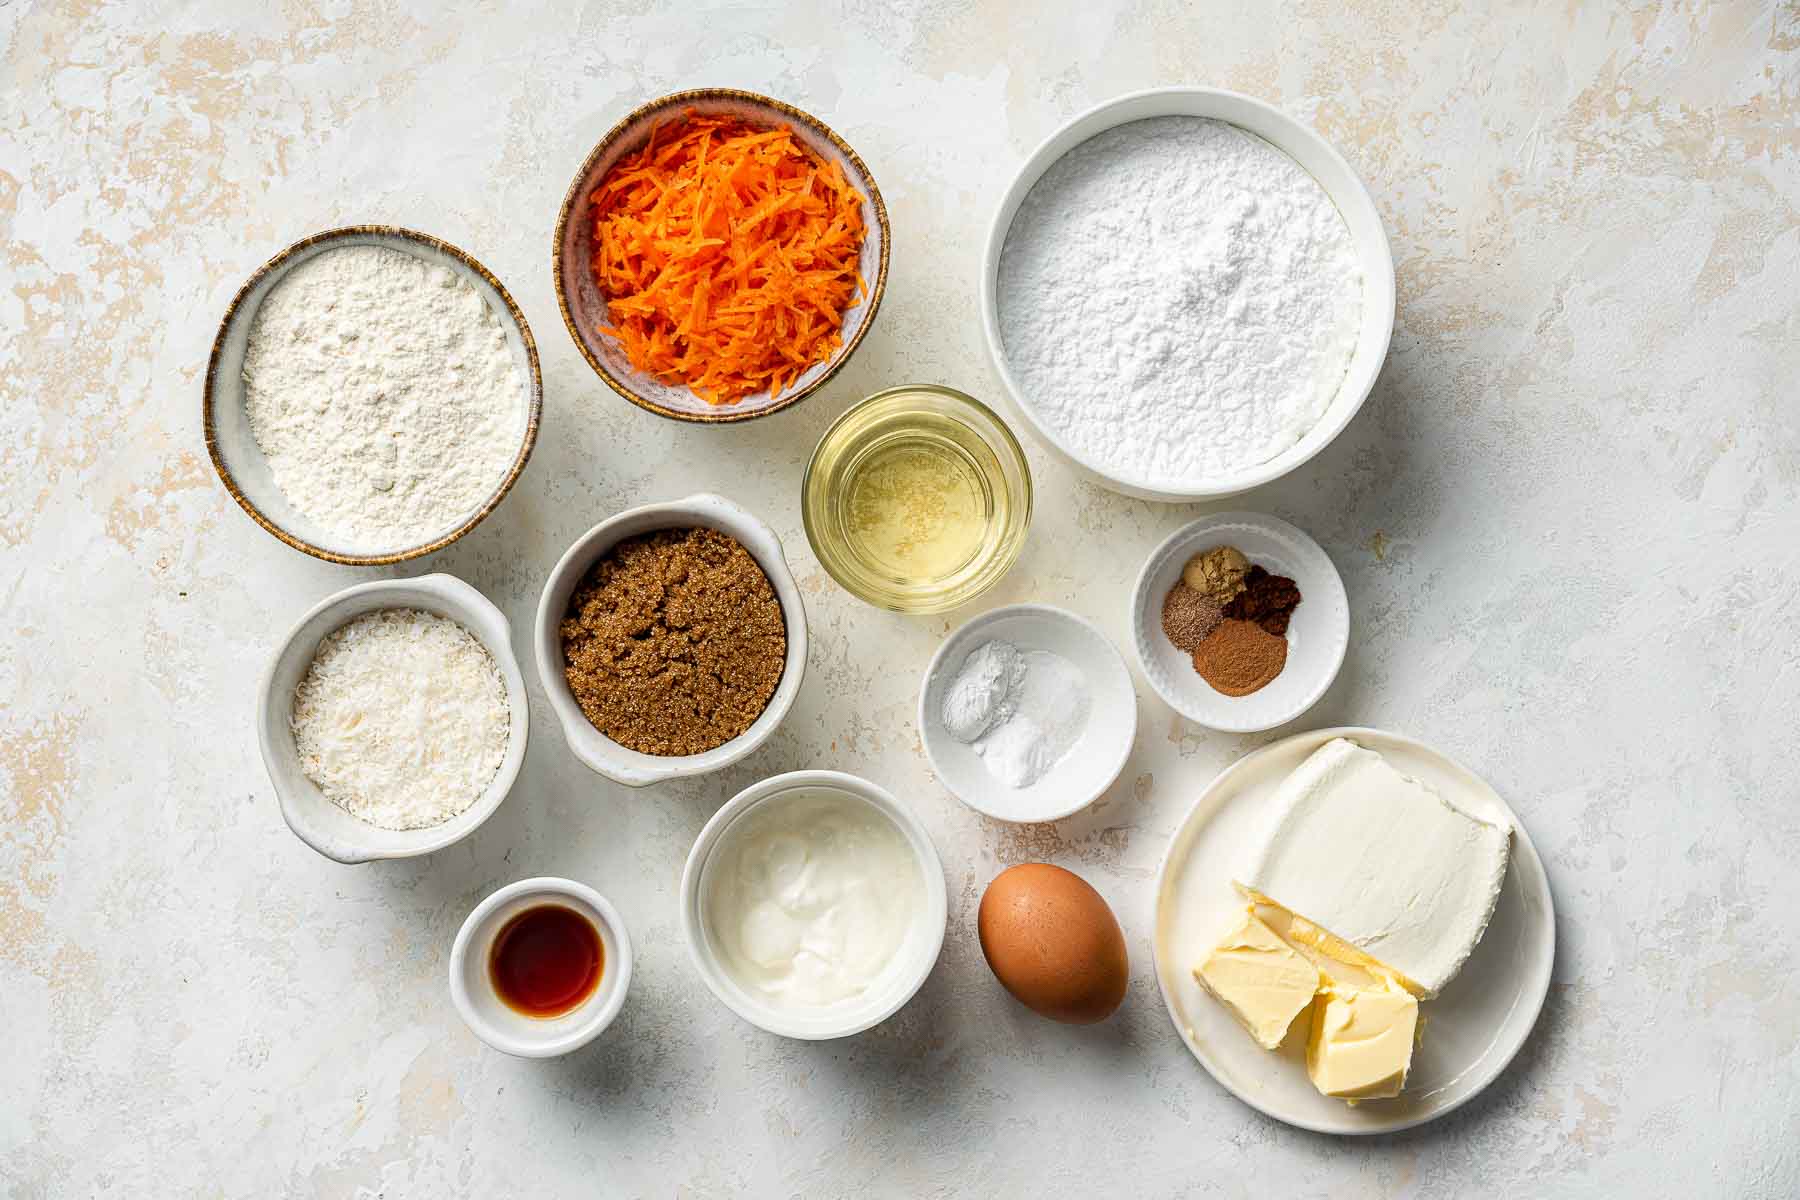 Ingredients for carrot cake in small bowls on white table.